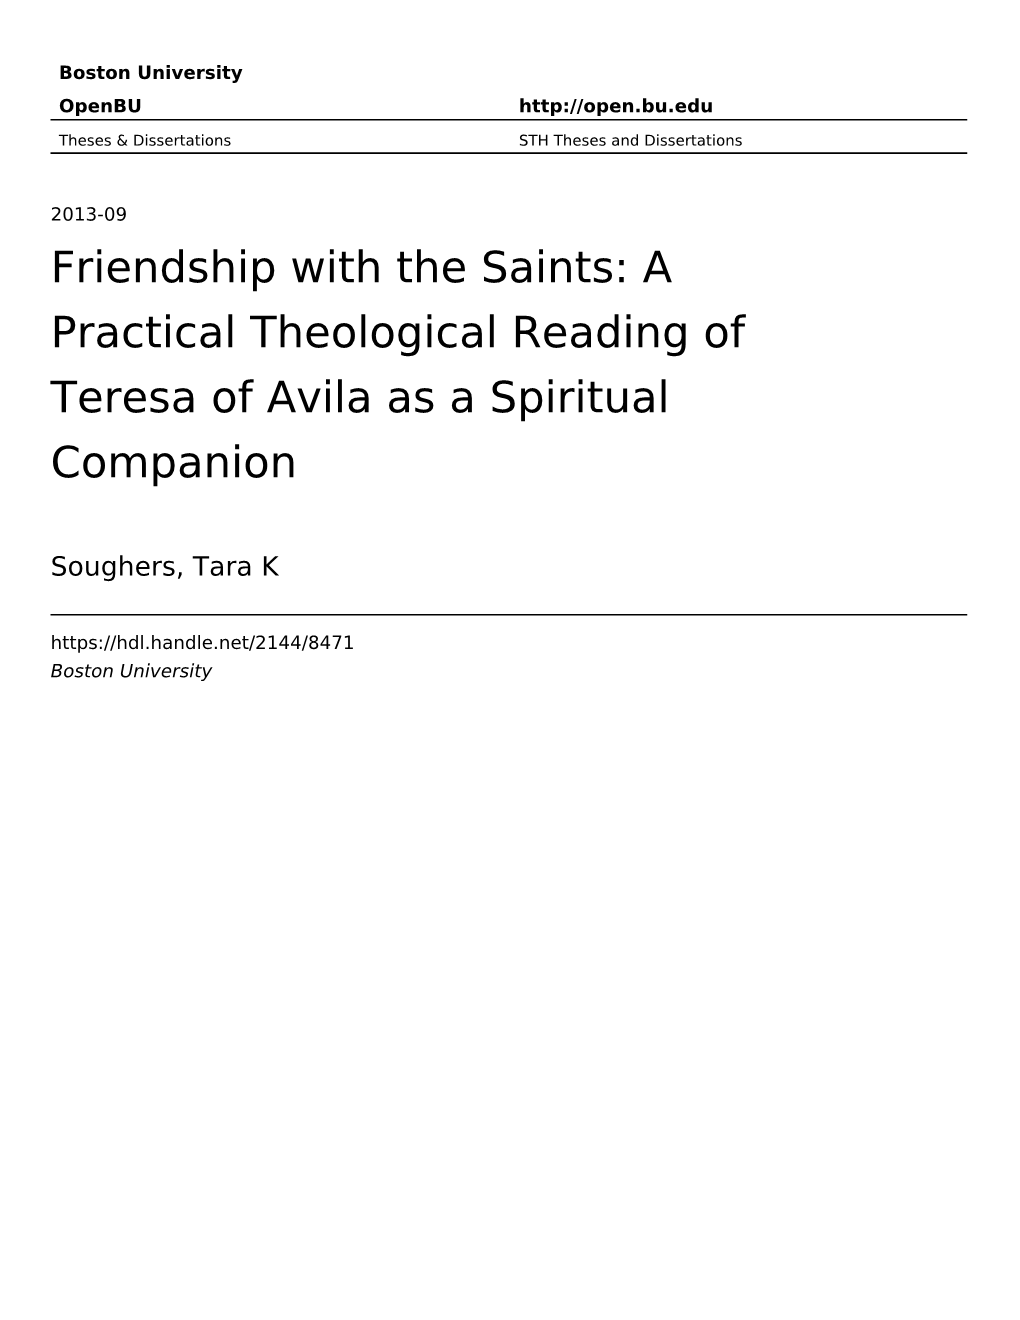 Friendship with the Saints: a Practical Theological Reading of Teresa of Avila As a Spiritual Companion